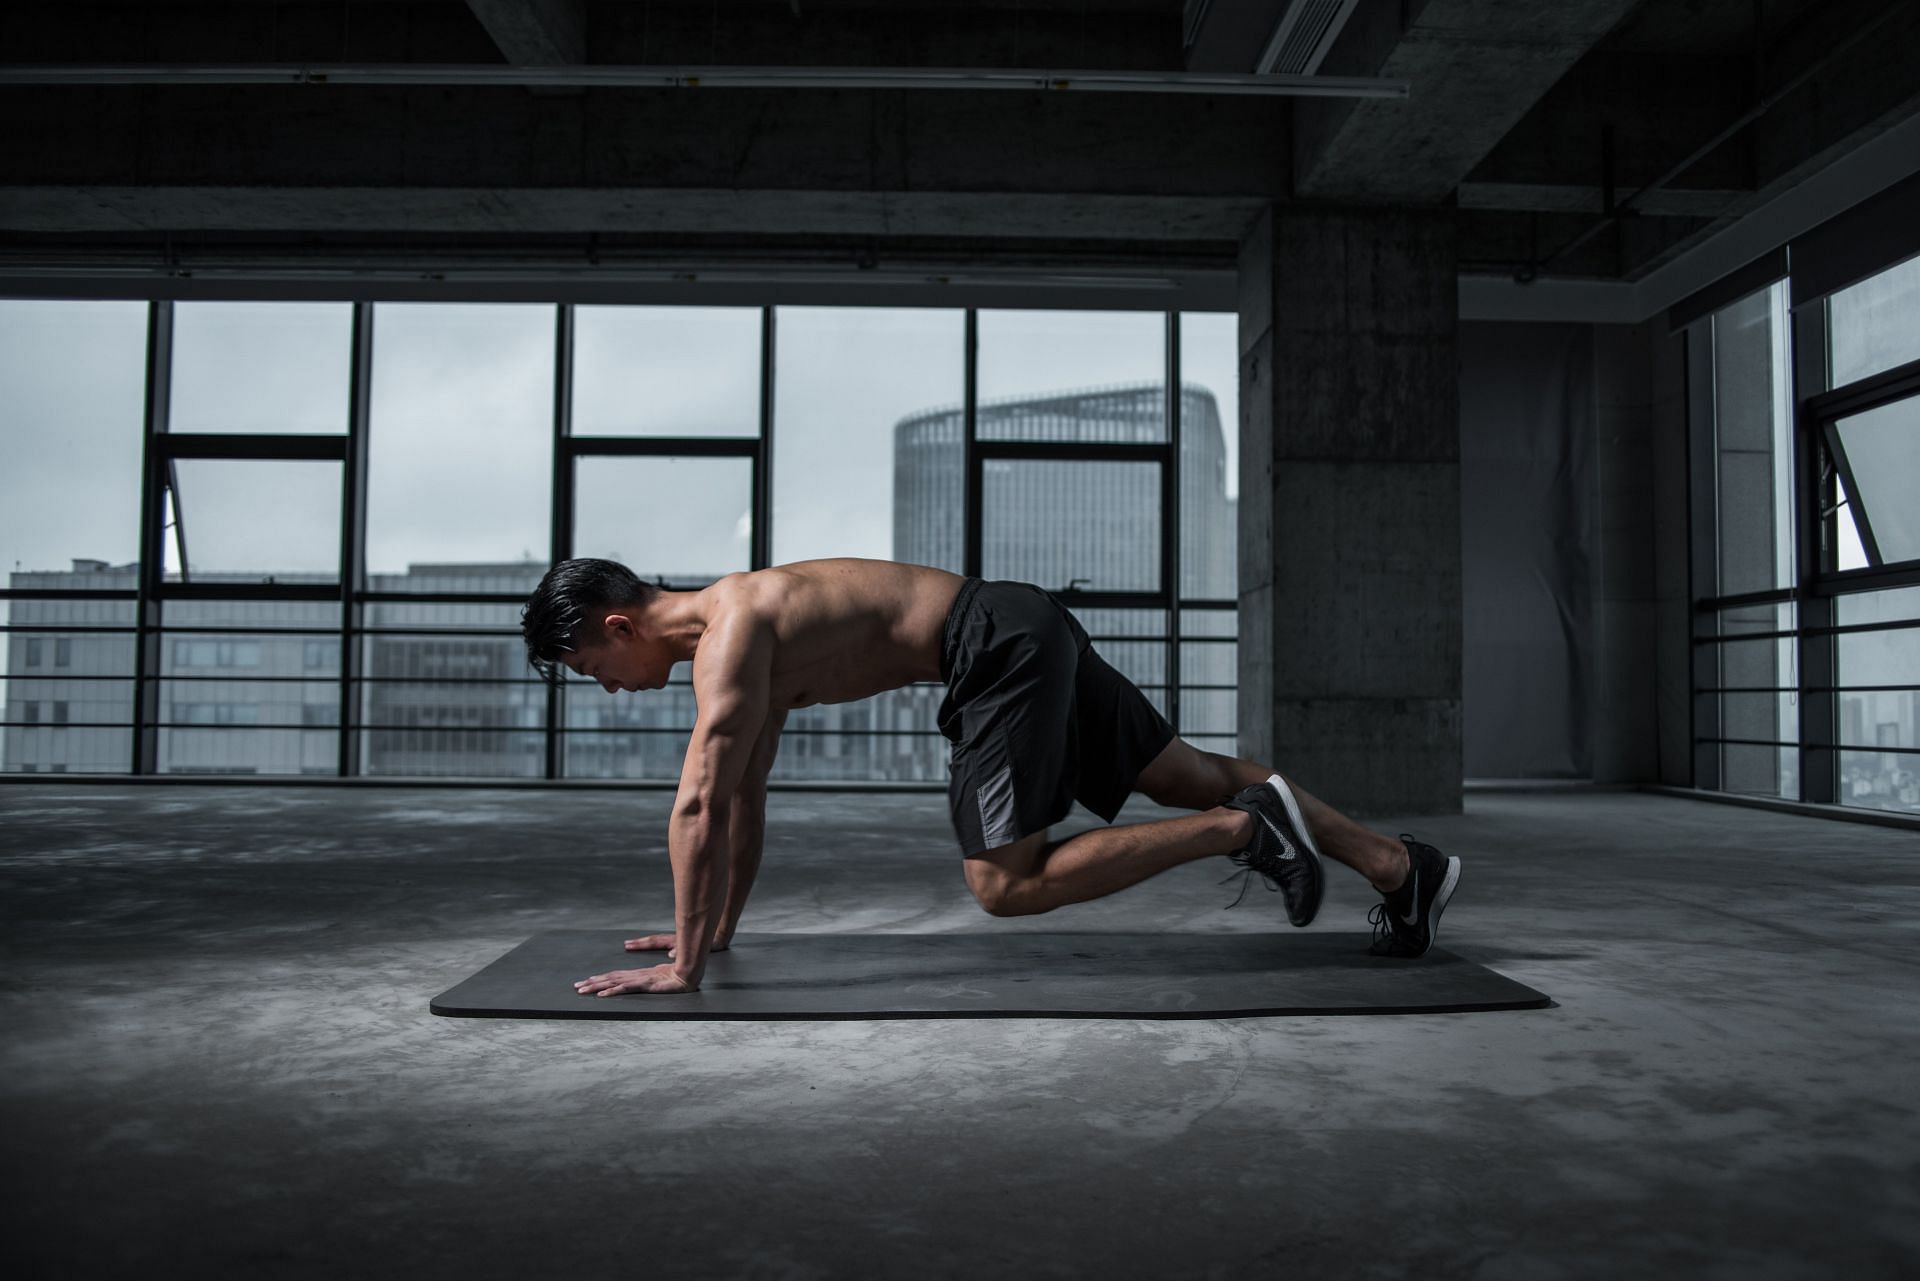 Six core workouts help you burn fat fast and make your waist smaller. (Image by Li Sun / Pexels)